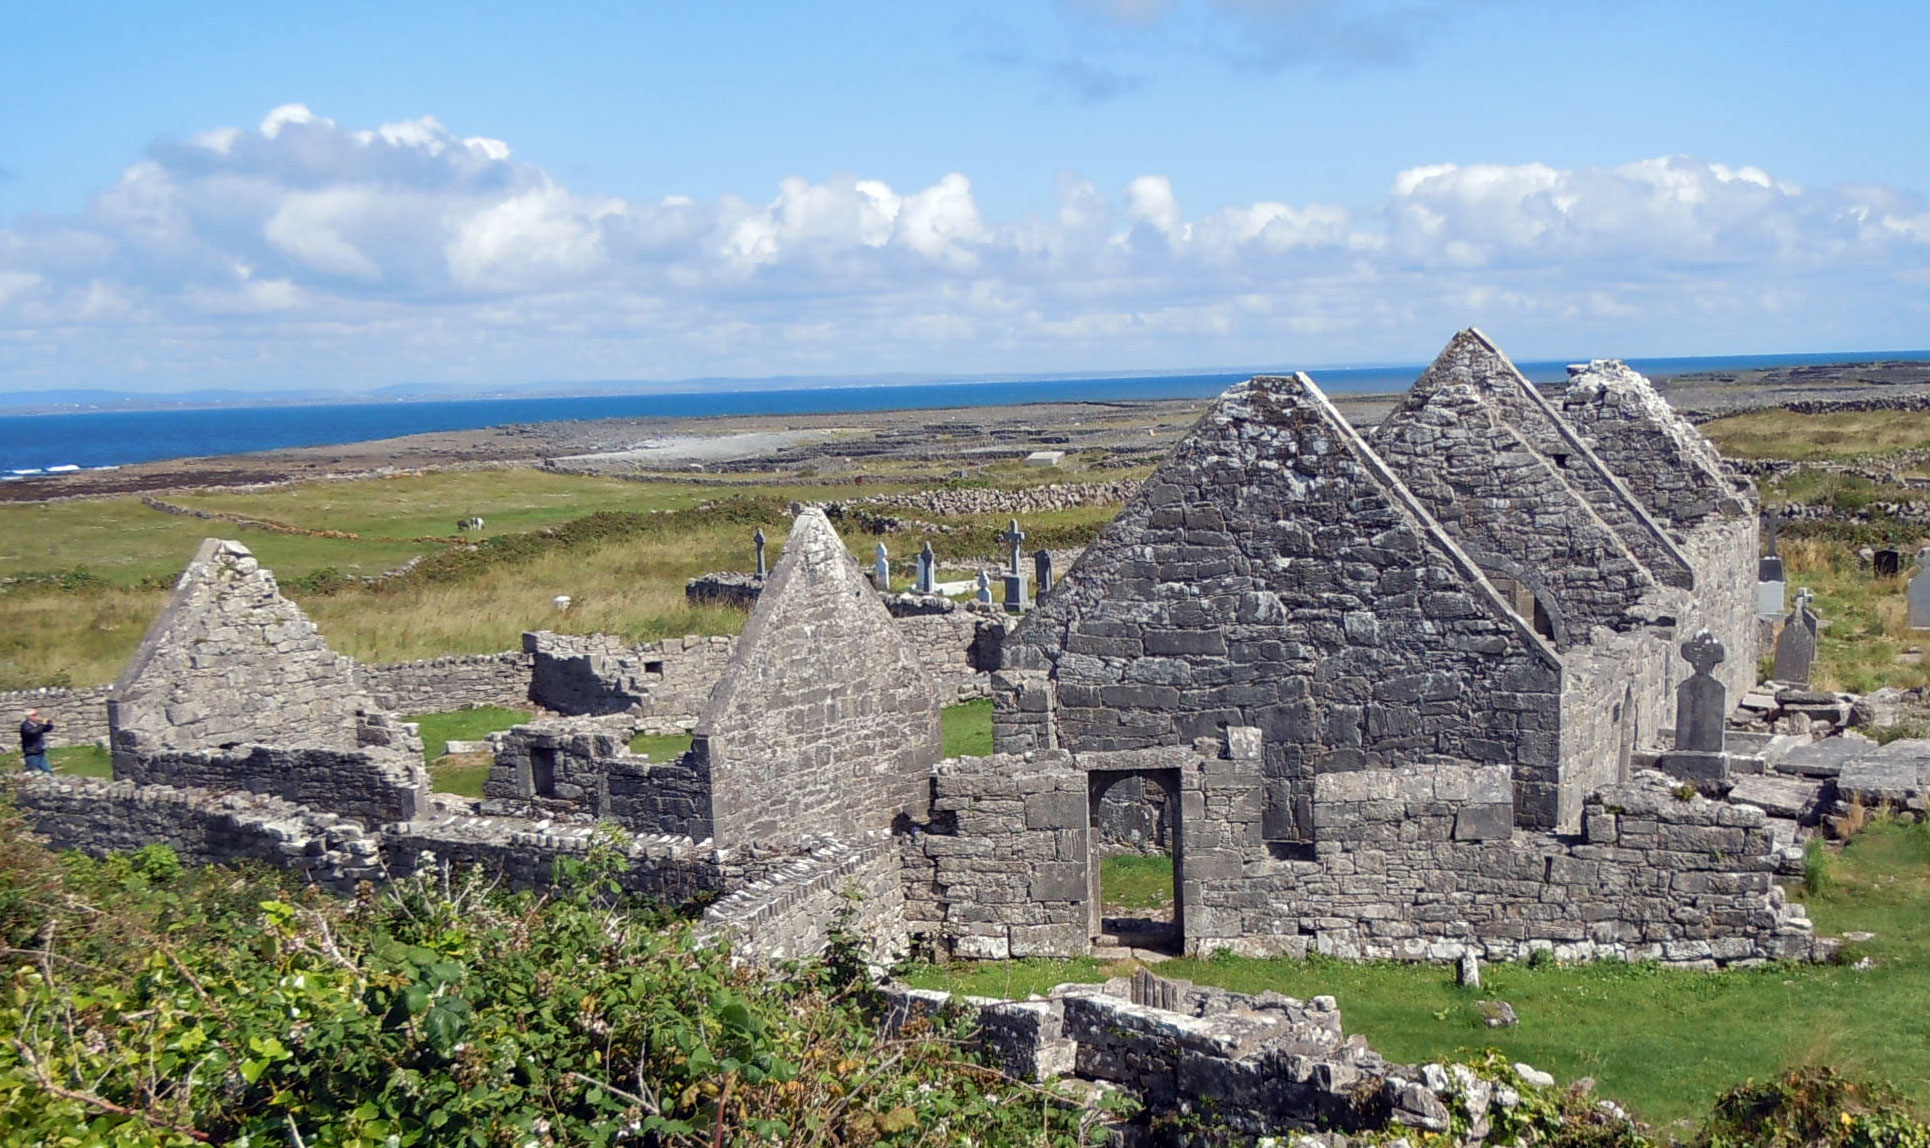 Exploring the Aran Islands is a cool thing to do in Galway Ireland